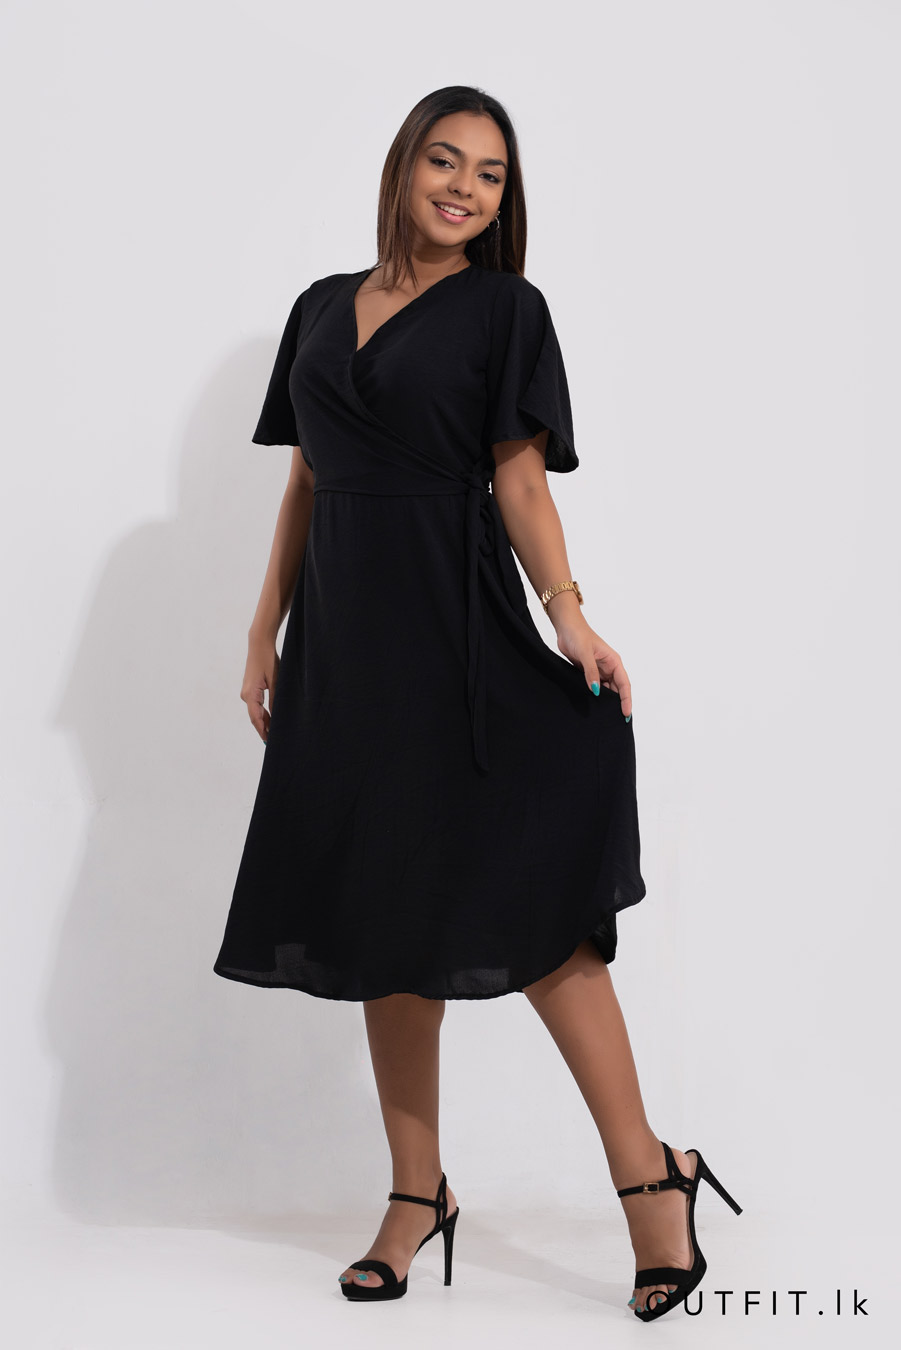 Front cross over midi dress - OUTFIT.lk